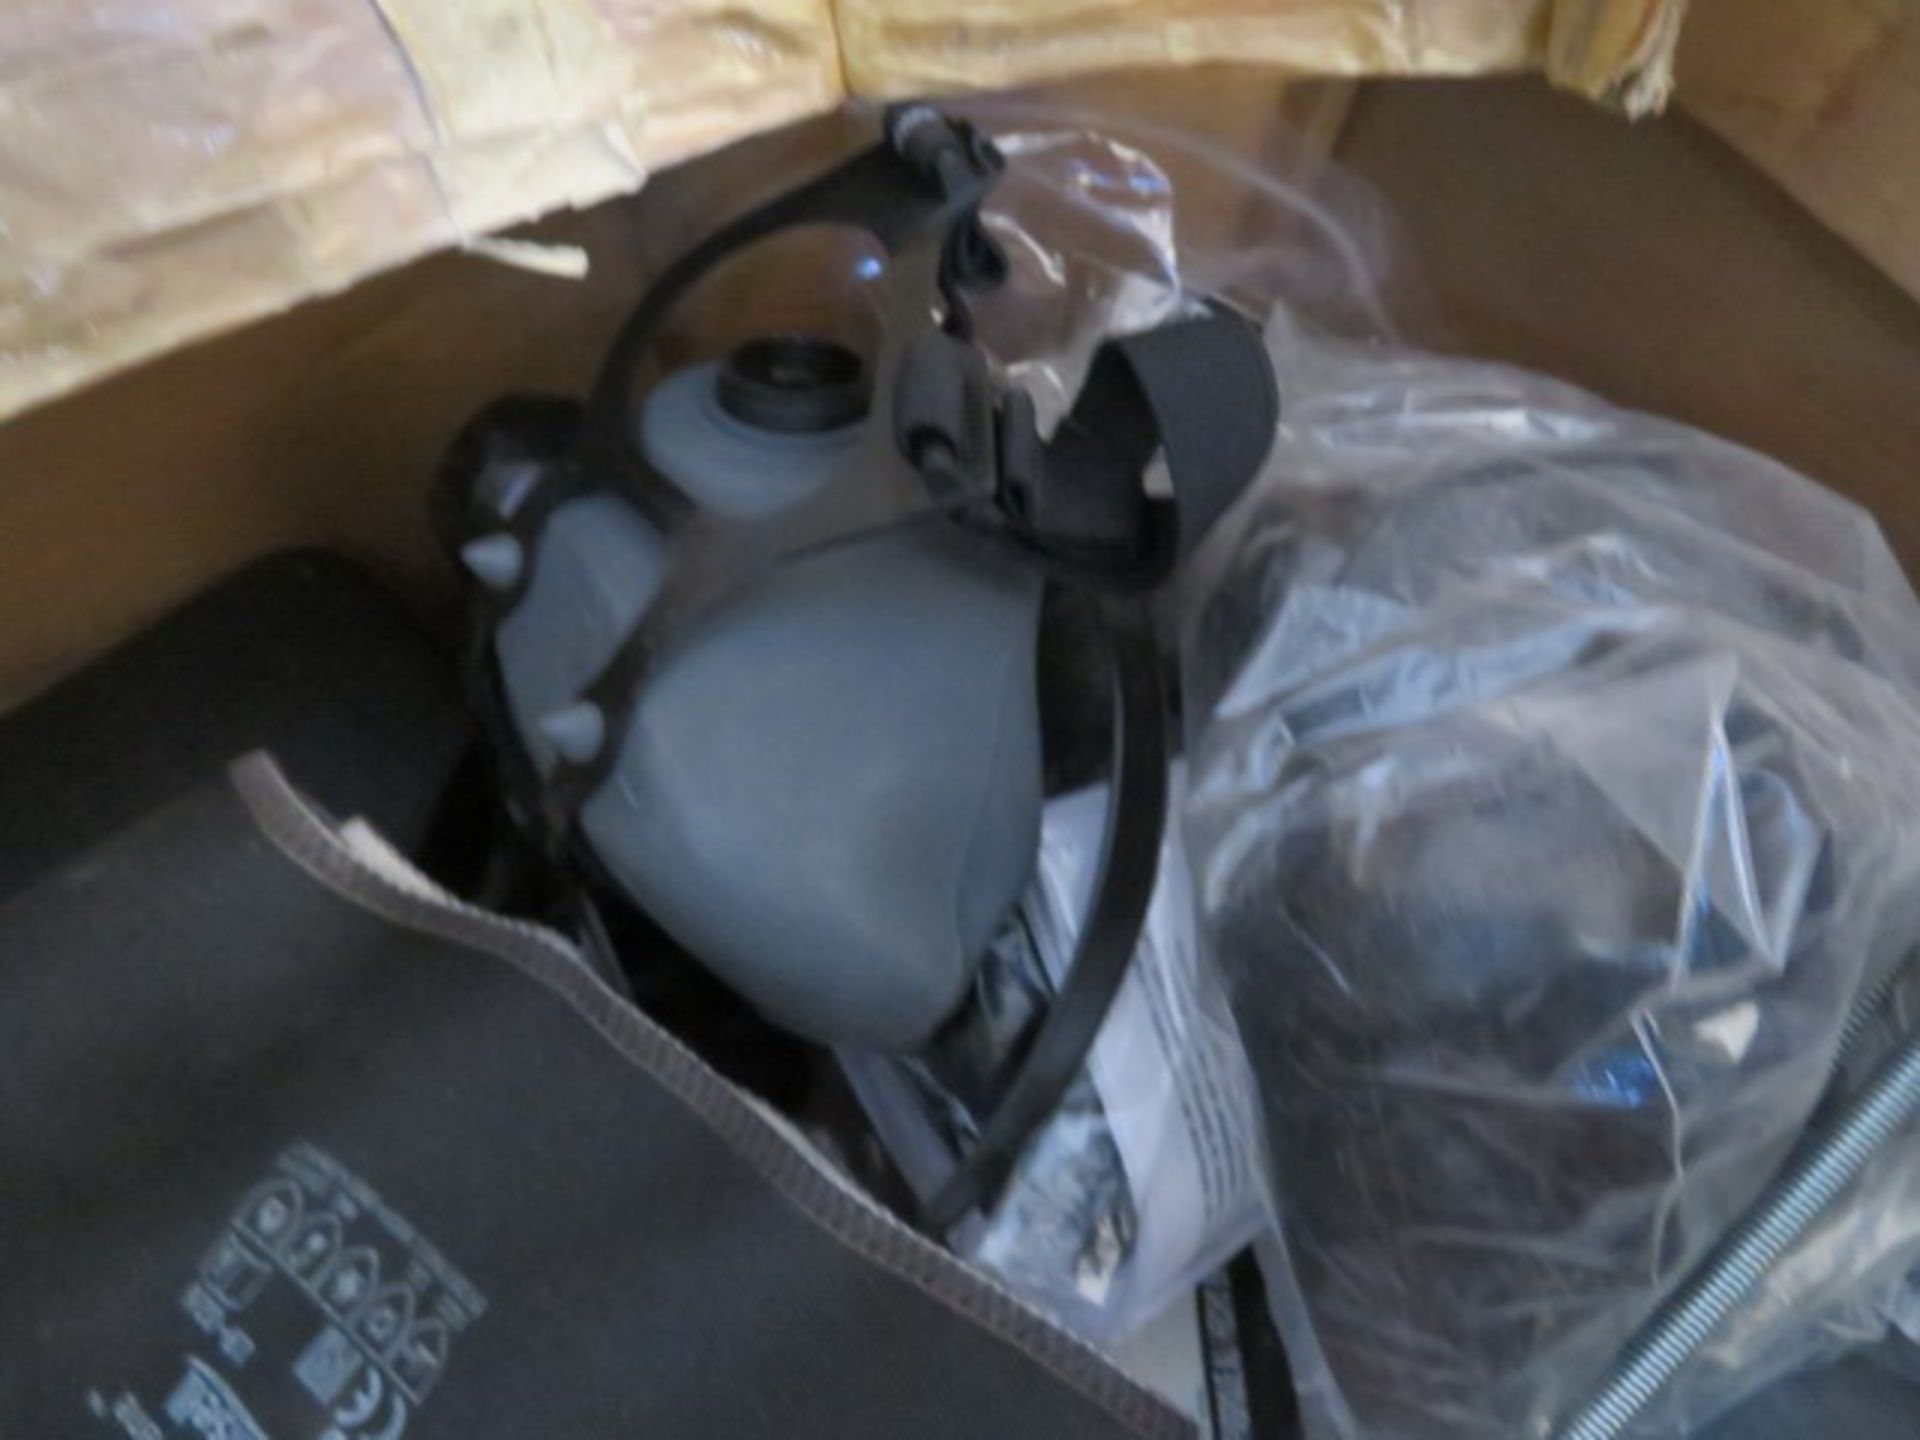 Contents of Shipping Container. To Include 1/2" PVDF Tubing, Safety Glasses, Safety Signs, - Image 7 of 51